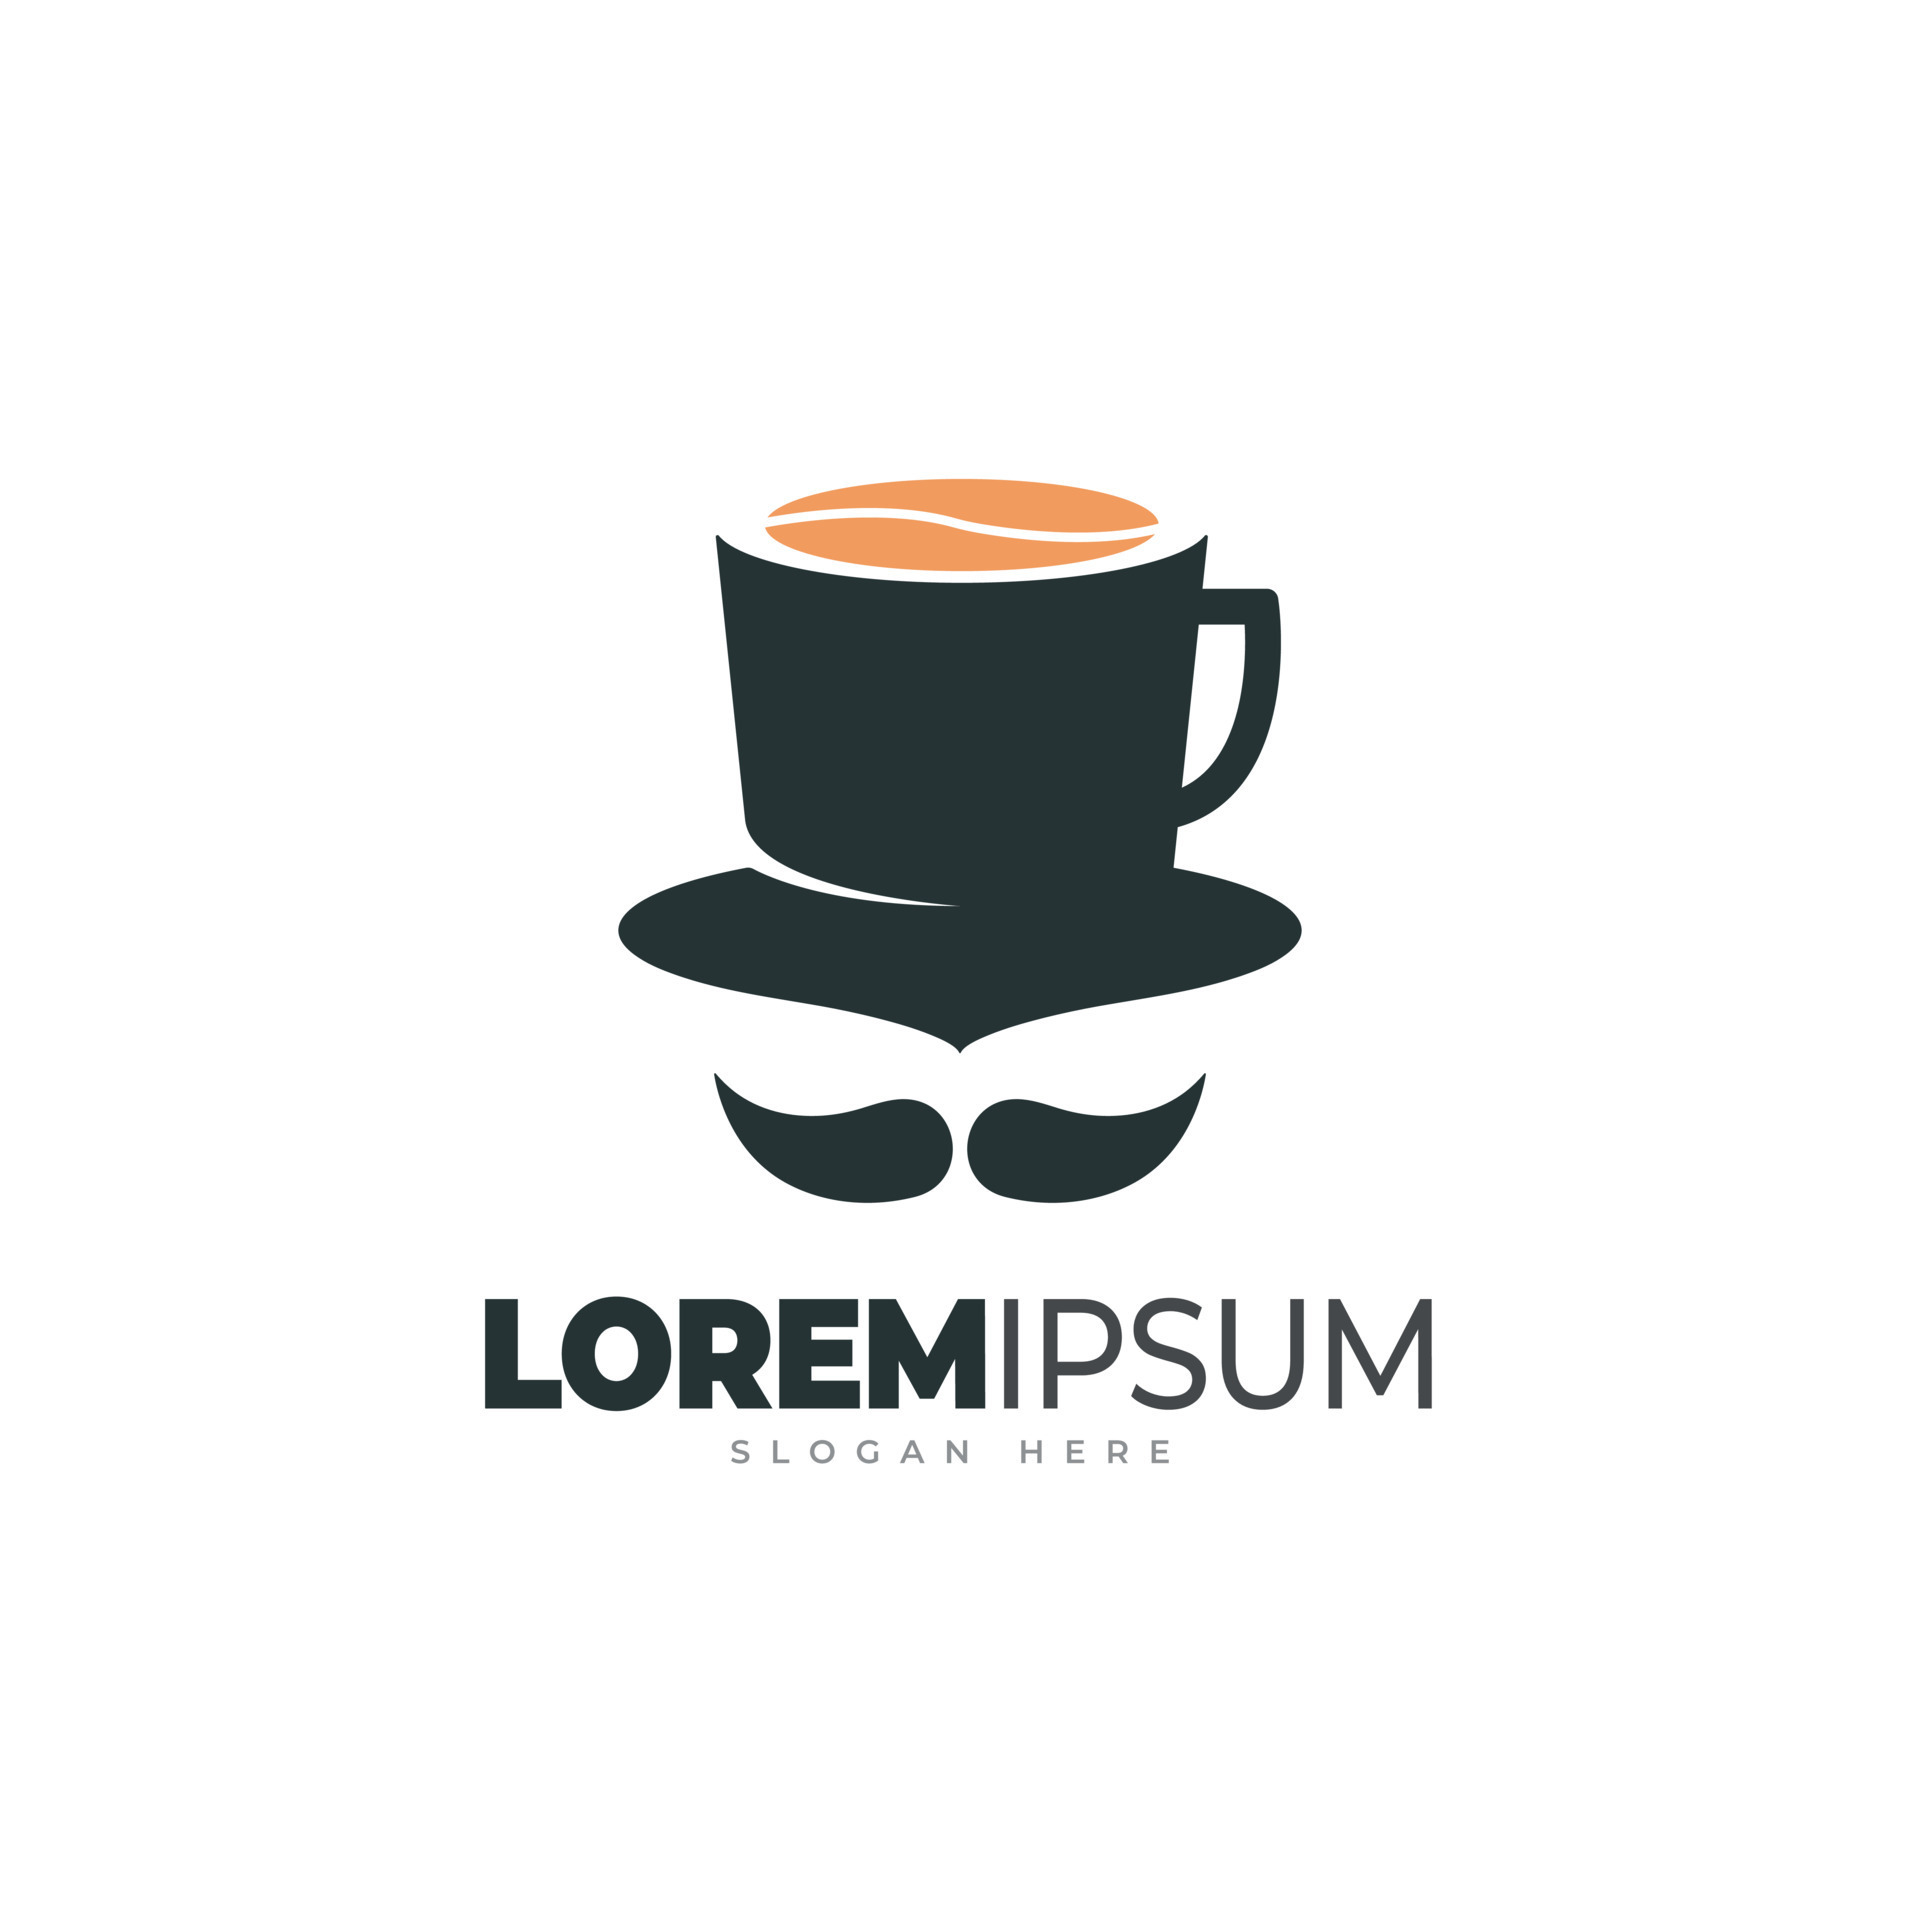 https://static.vecteezy.com/system/resources/previews/014/863/511/original/mister-coffee-logo-template-coffee-shop-logo-combined-the-cup-of-coffee-hat-and-mustache-icon-concept-vector.jpg